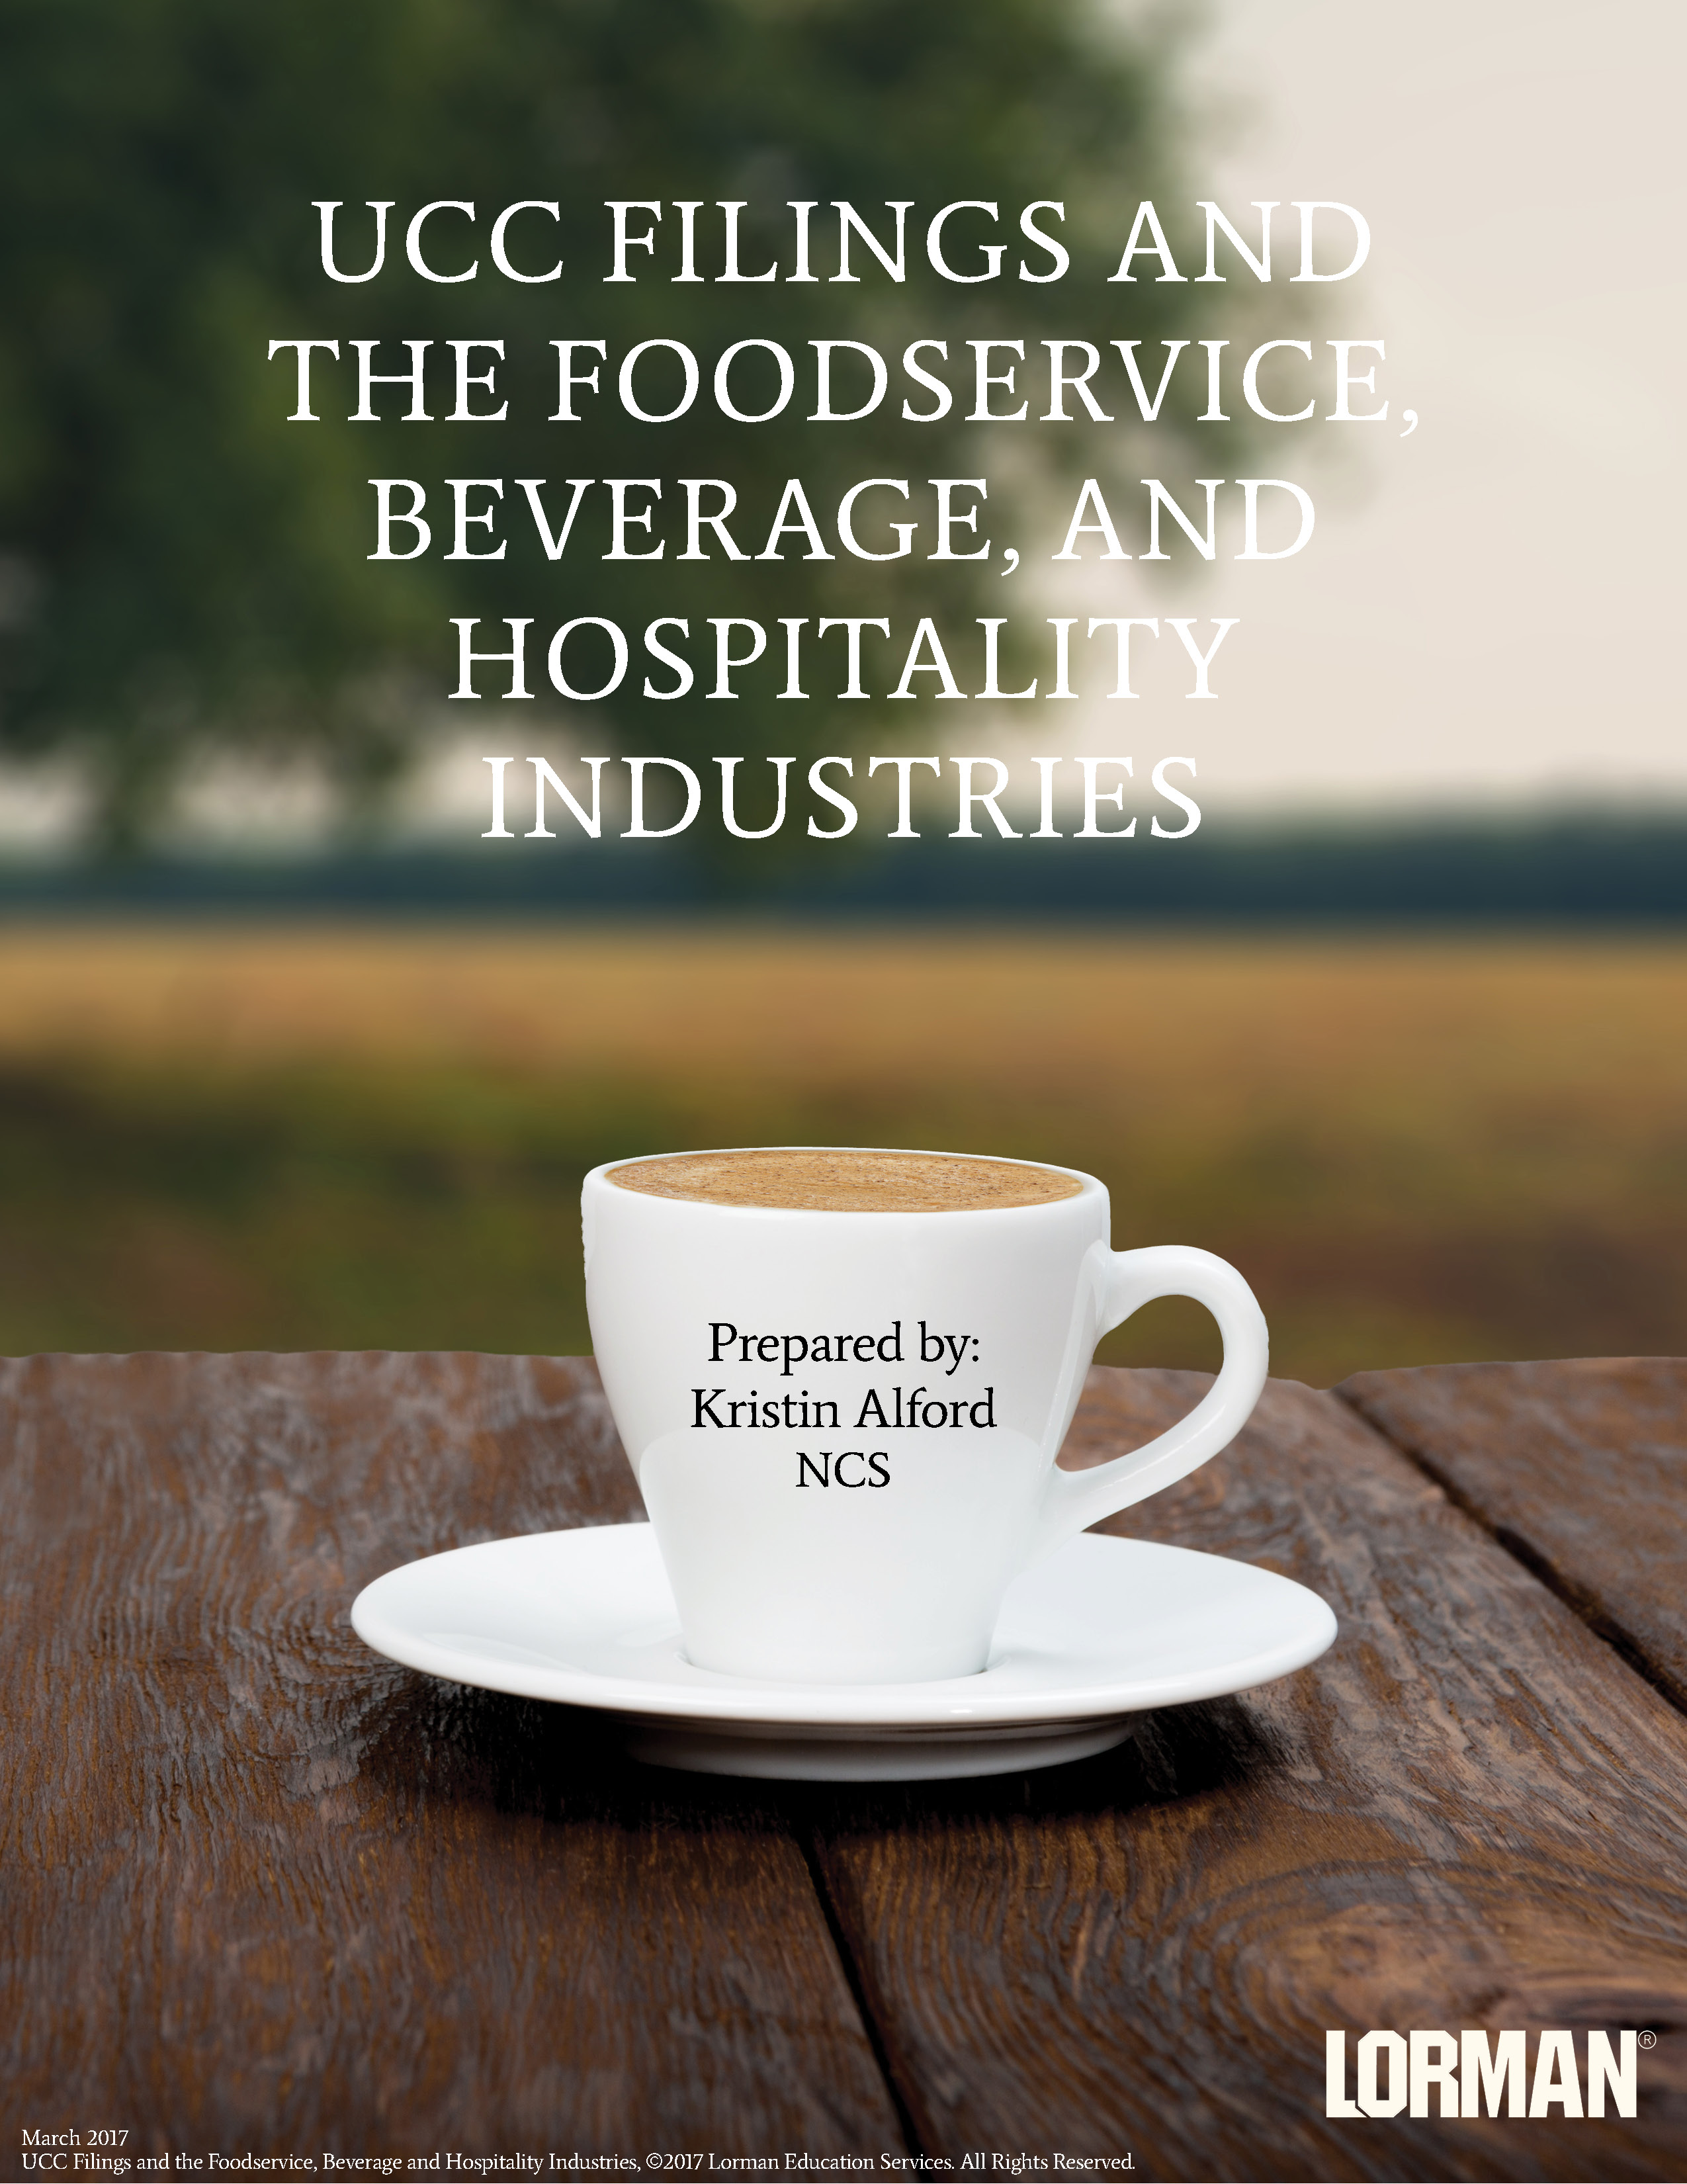 UCC Filings and the Foodservice, Beverage, and Hospitality Industries